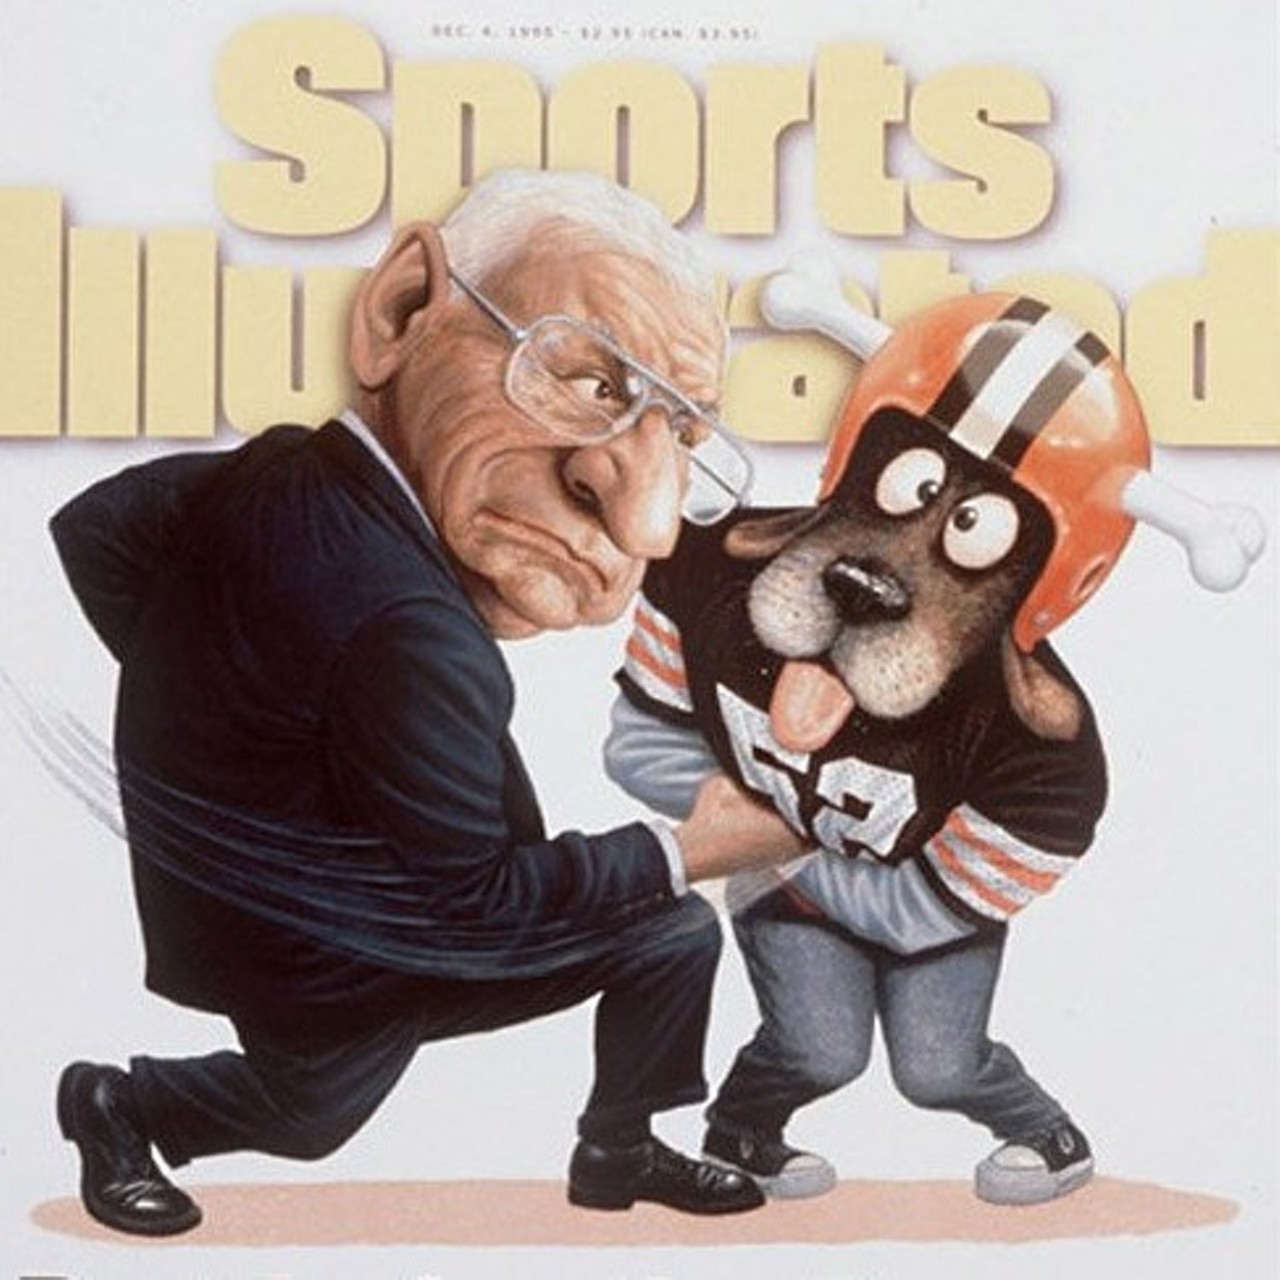  The Stealing of the Cleveland Browns
In 1995, Browns&#146; owner Art Modell announced he was moving the beloved franchise to Baltimore. NFL owner&#146;s voted 25-2 to move the team and that resulted in Cleveland being football-less from 1996 to 1998. The team moved back in 1999 but is still recovering to this day.
Photo via Scene Archives